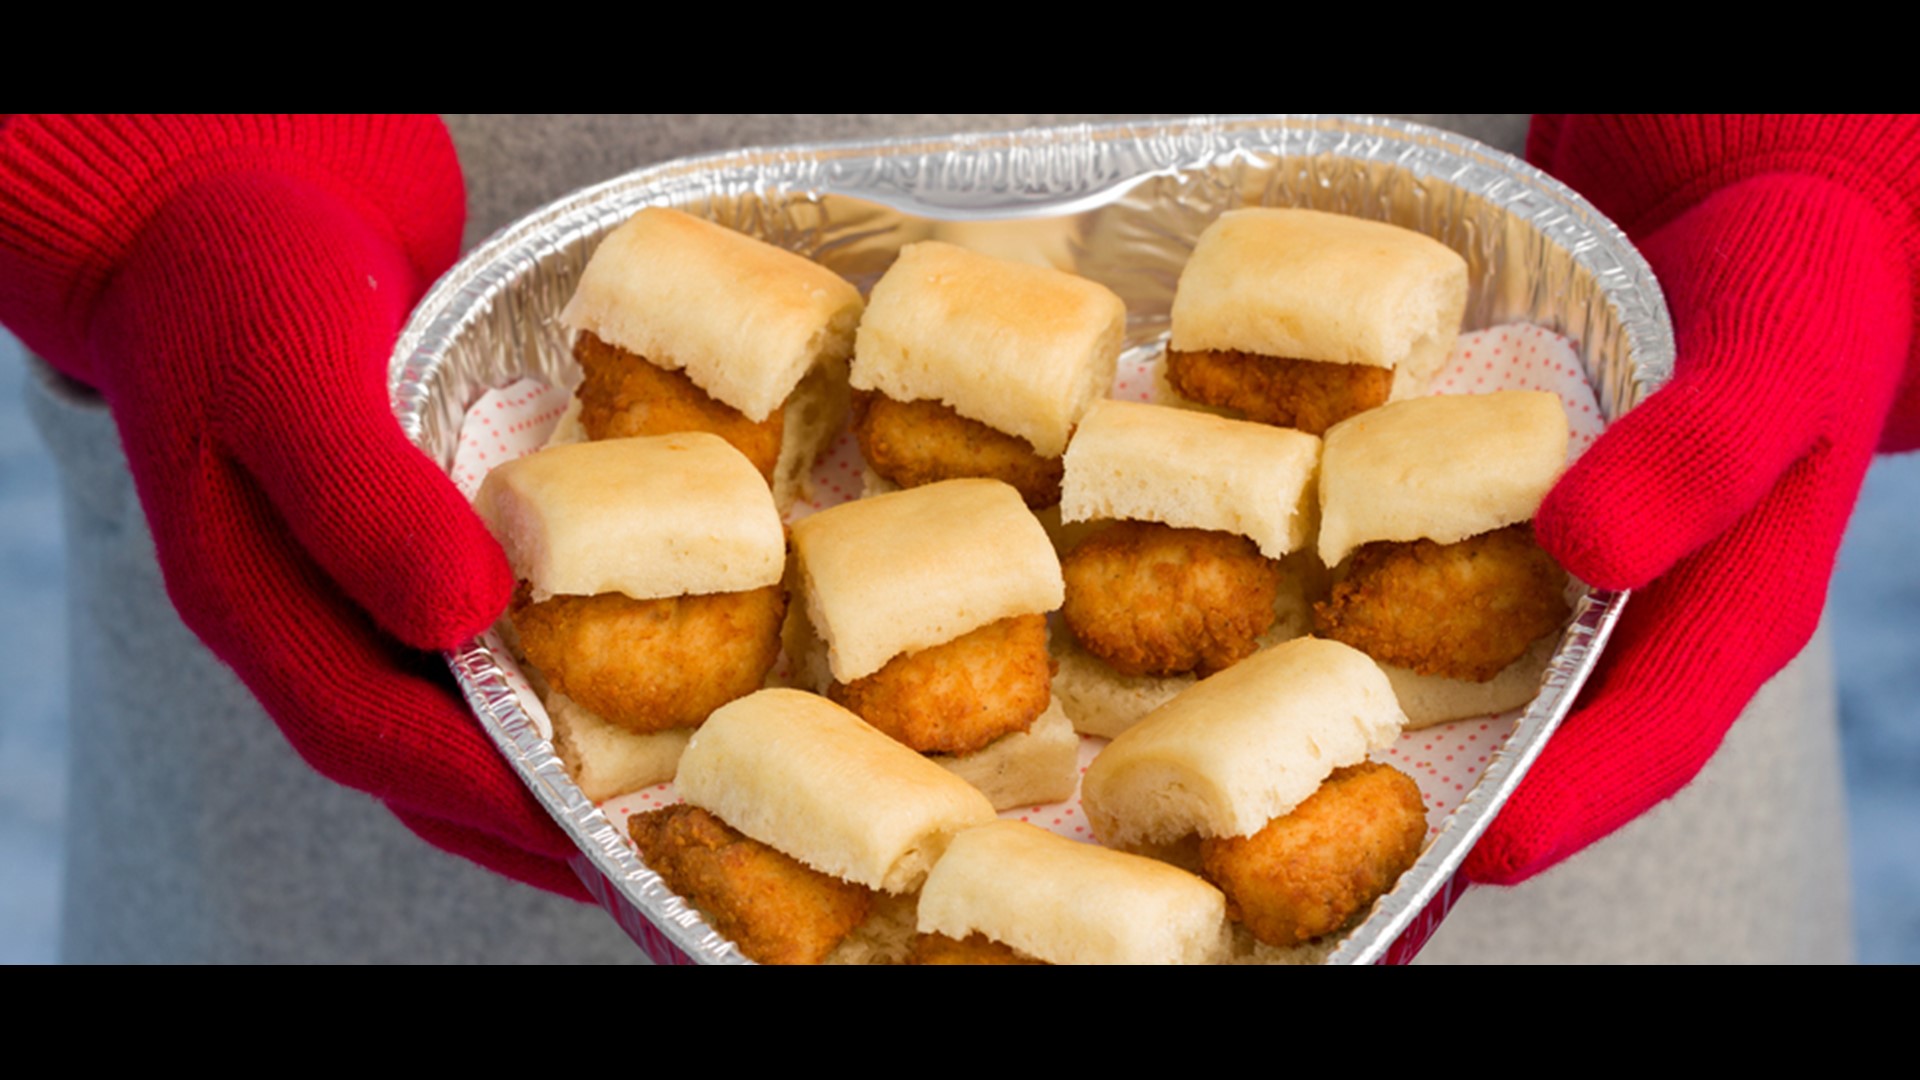 ChickfilA bringing back chicken in a heartshaped tray for Valentine